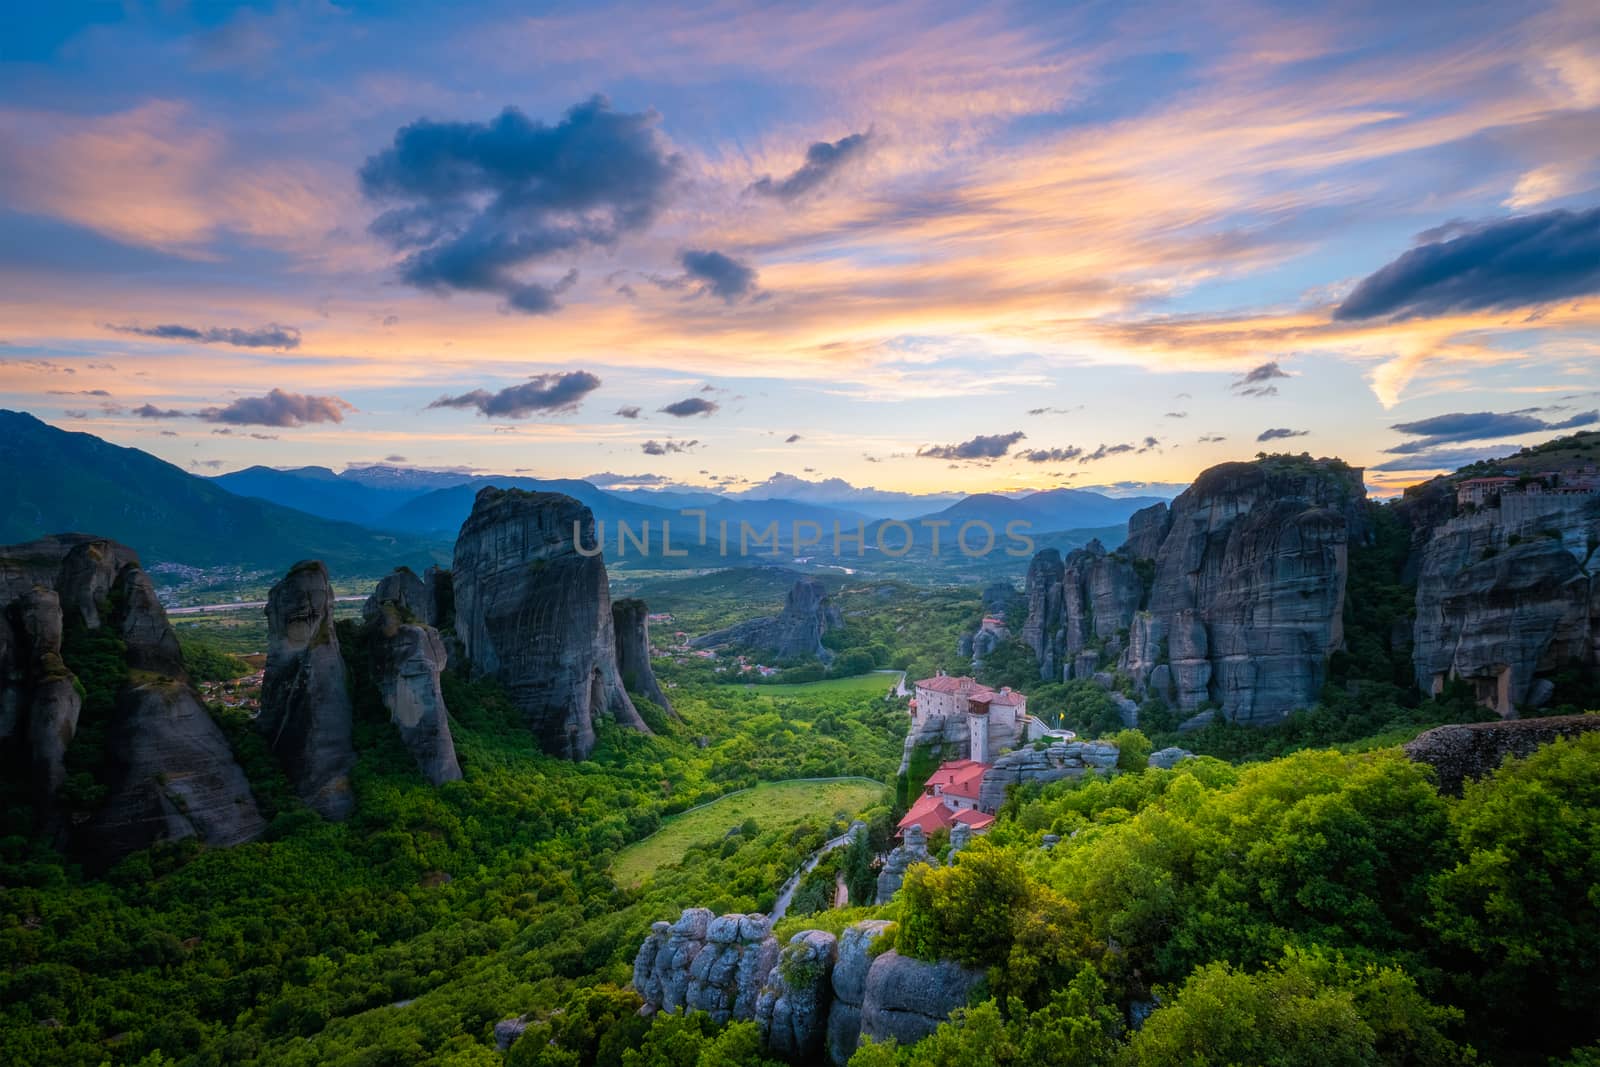 Sunset sky and monasteries of Meteora by dimol